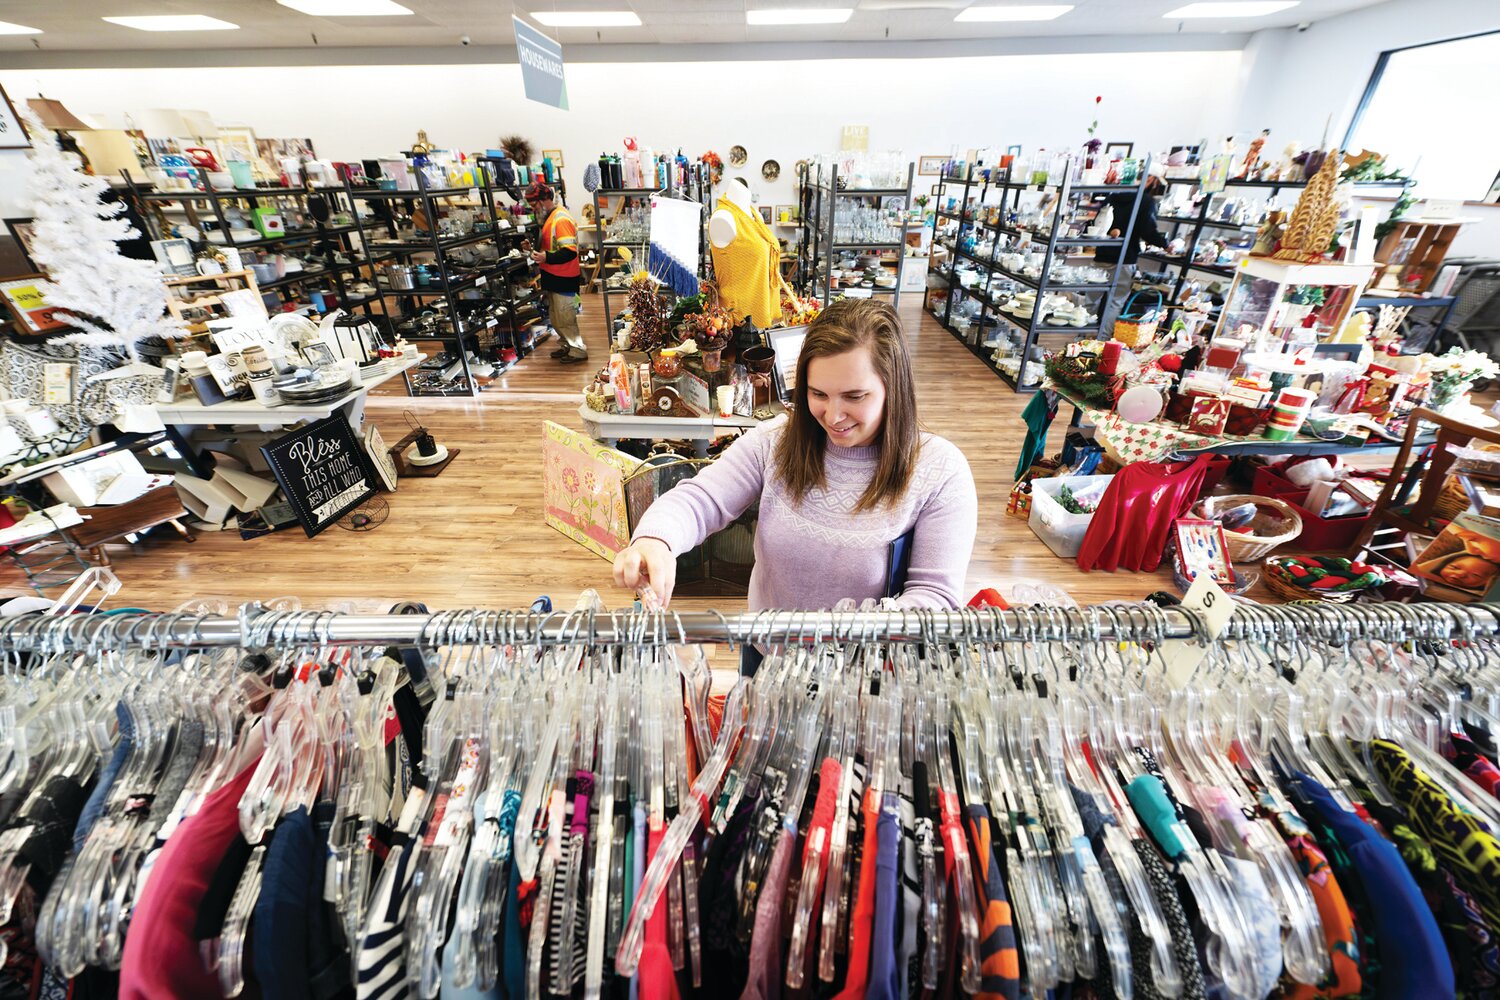 Shopper Abby Reiter looks through one of the clothing racks at Worthwhile Thrift in Plumstead Township.